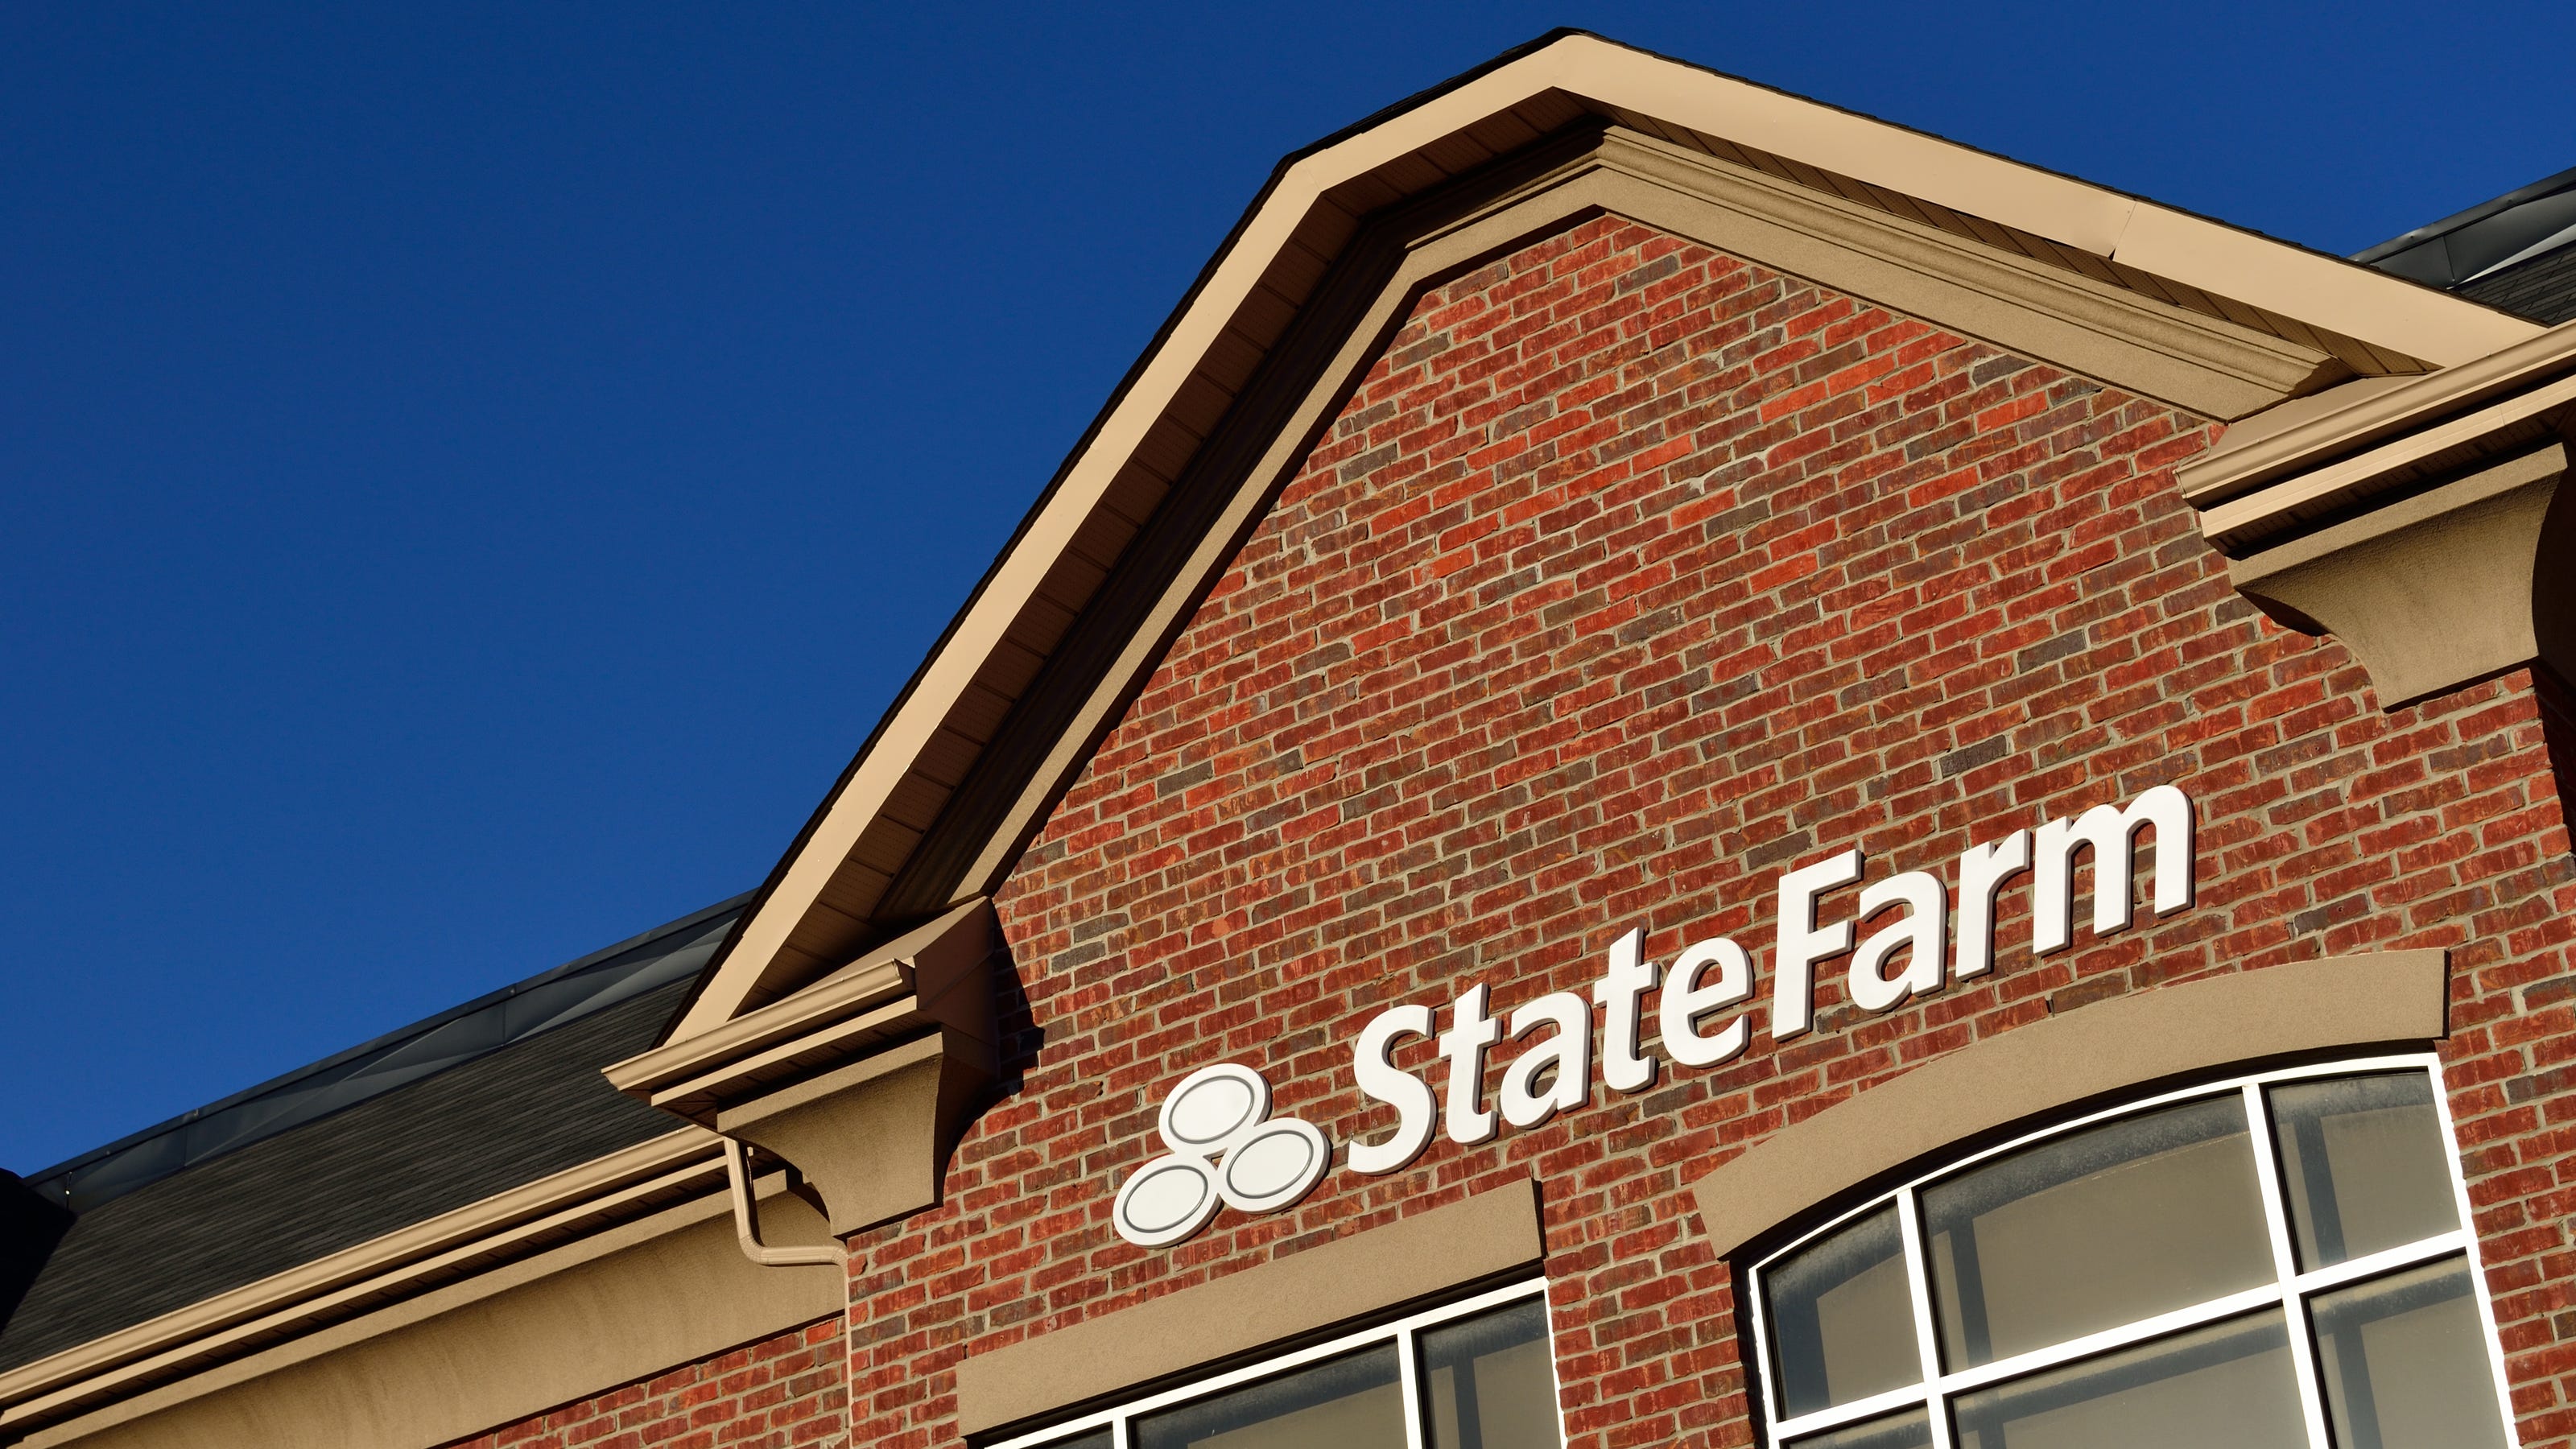 State Farm to close Indianapolis facility, lay off 100 workers